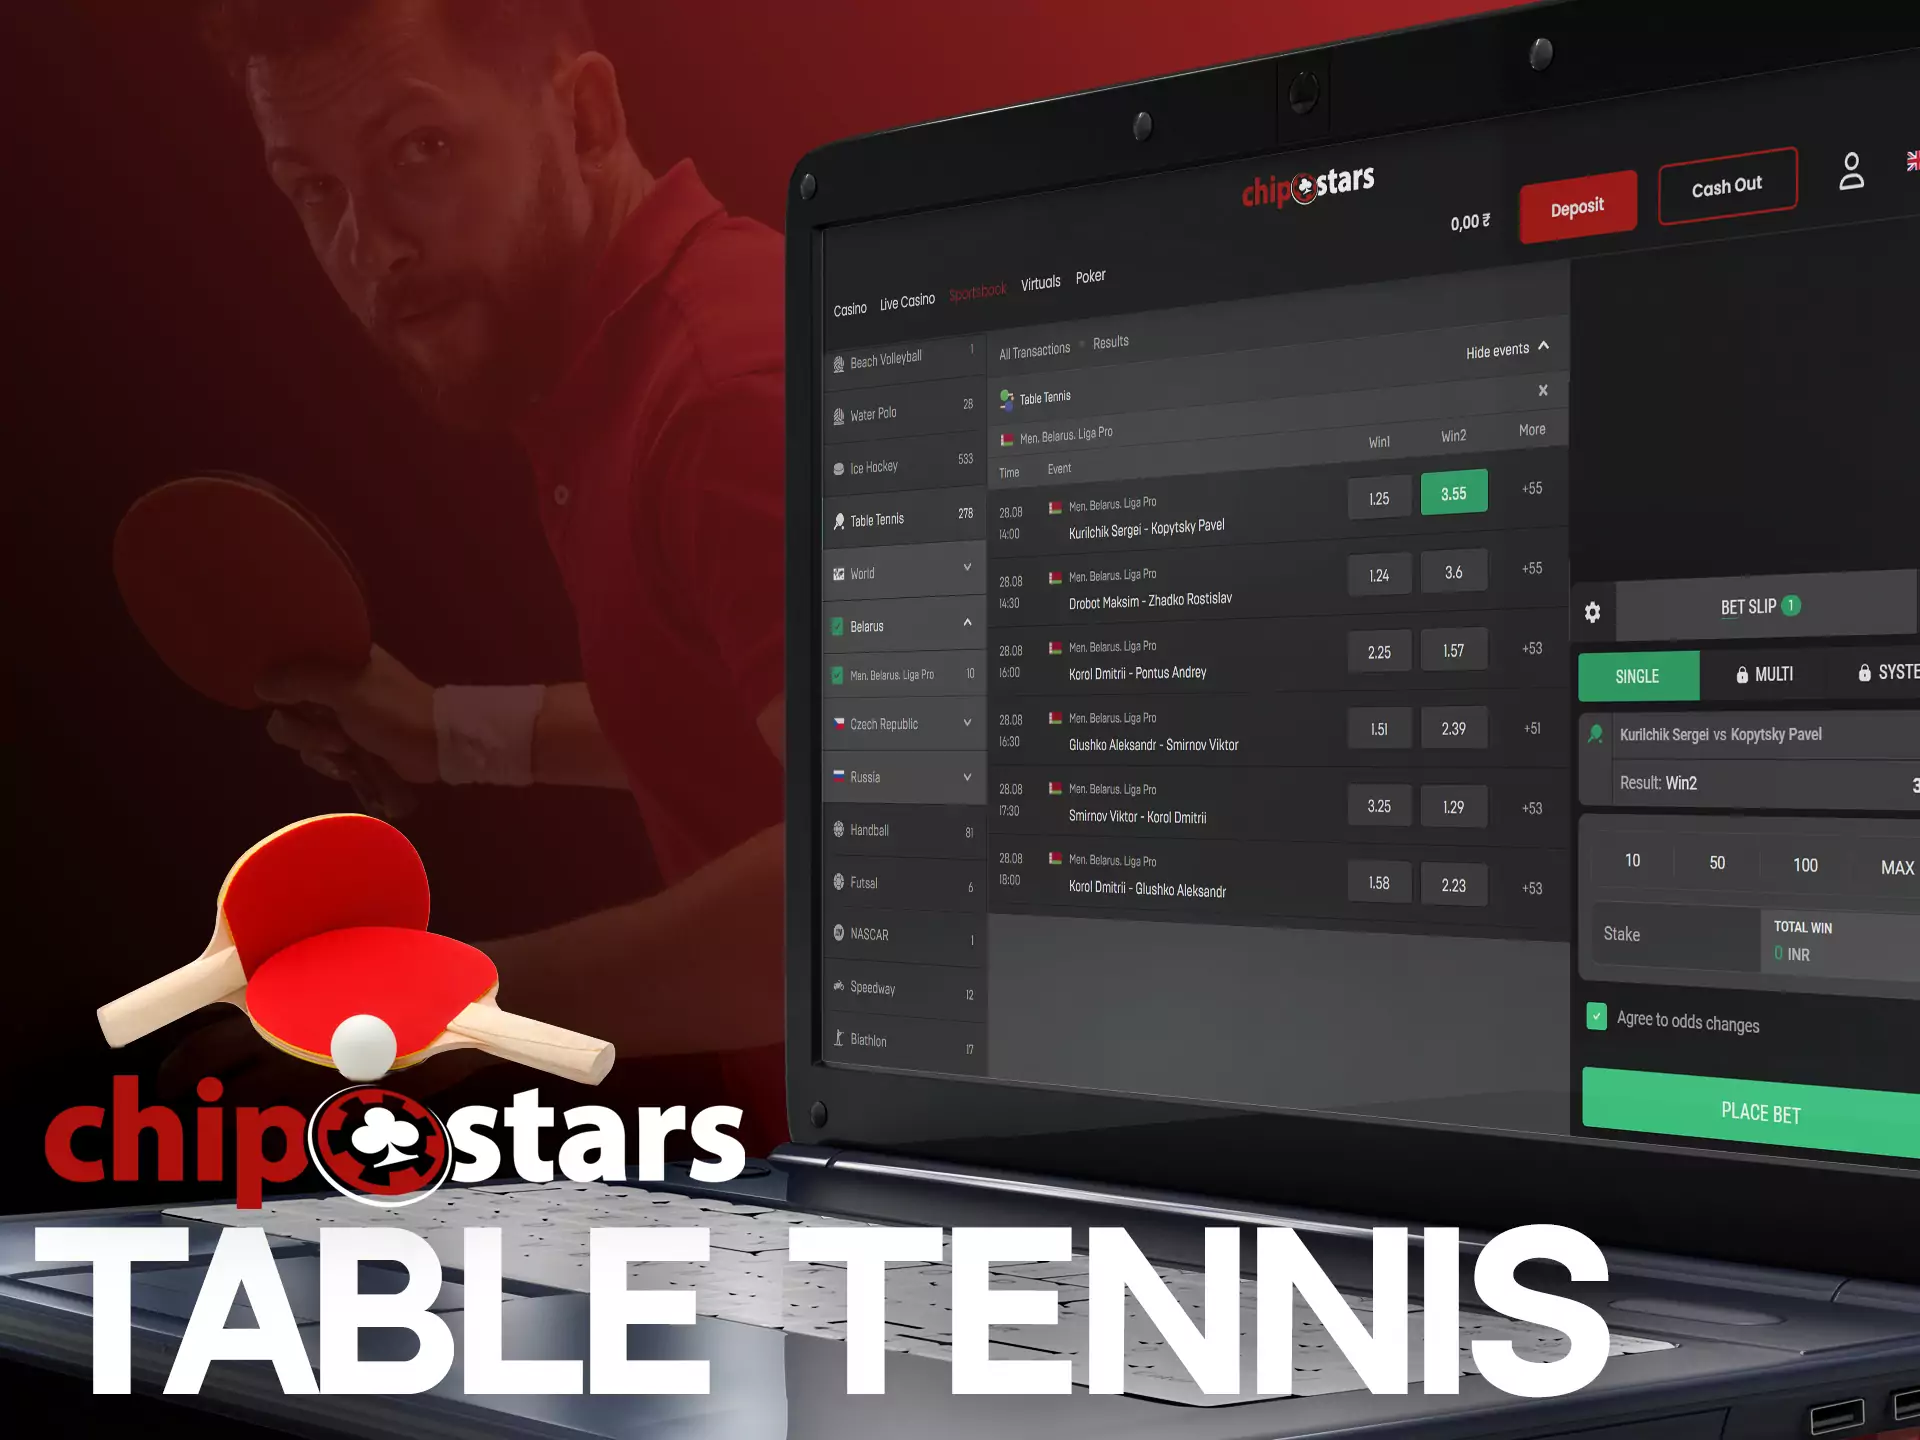 In the line and live sections, you find all the available table tennis matches on Chipstars.